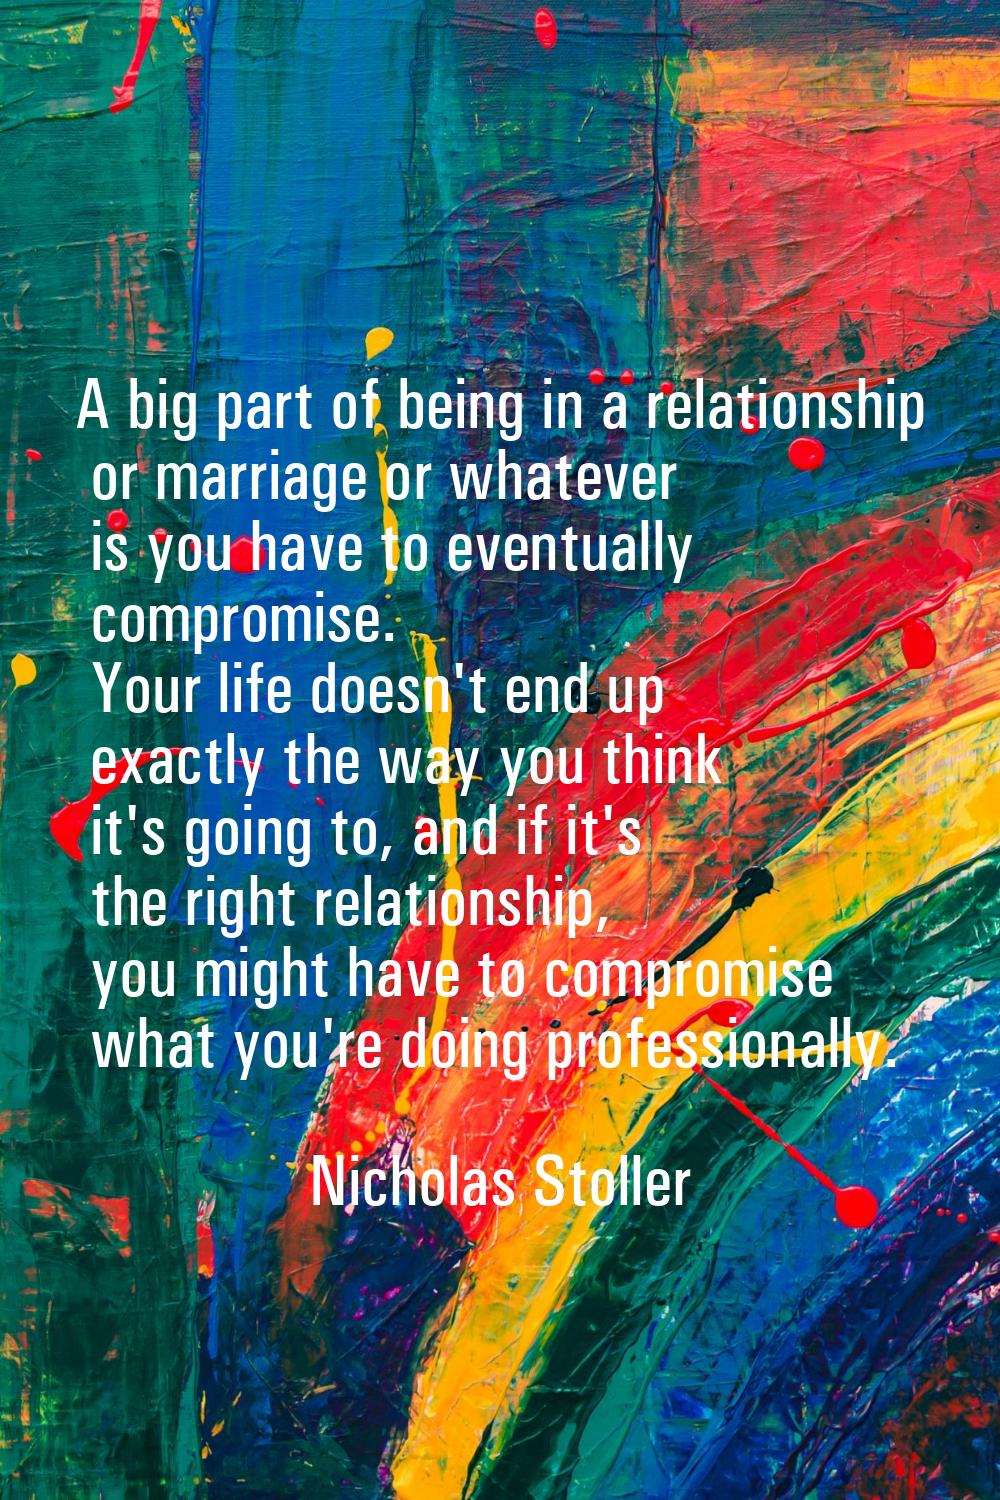 A big part of being in a relationship or marriage or whatever is you have to eventually compromise.